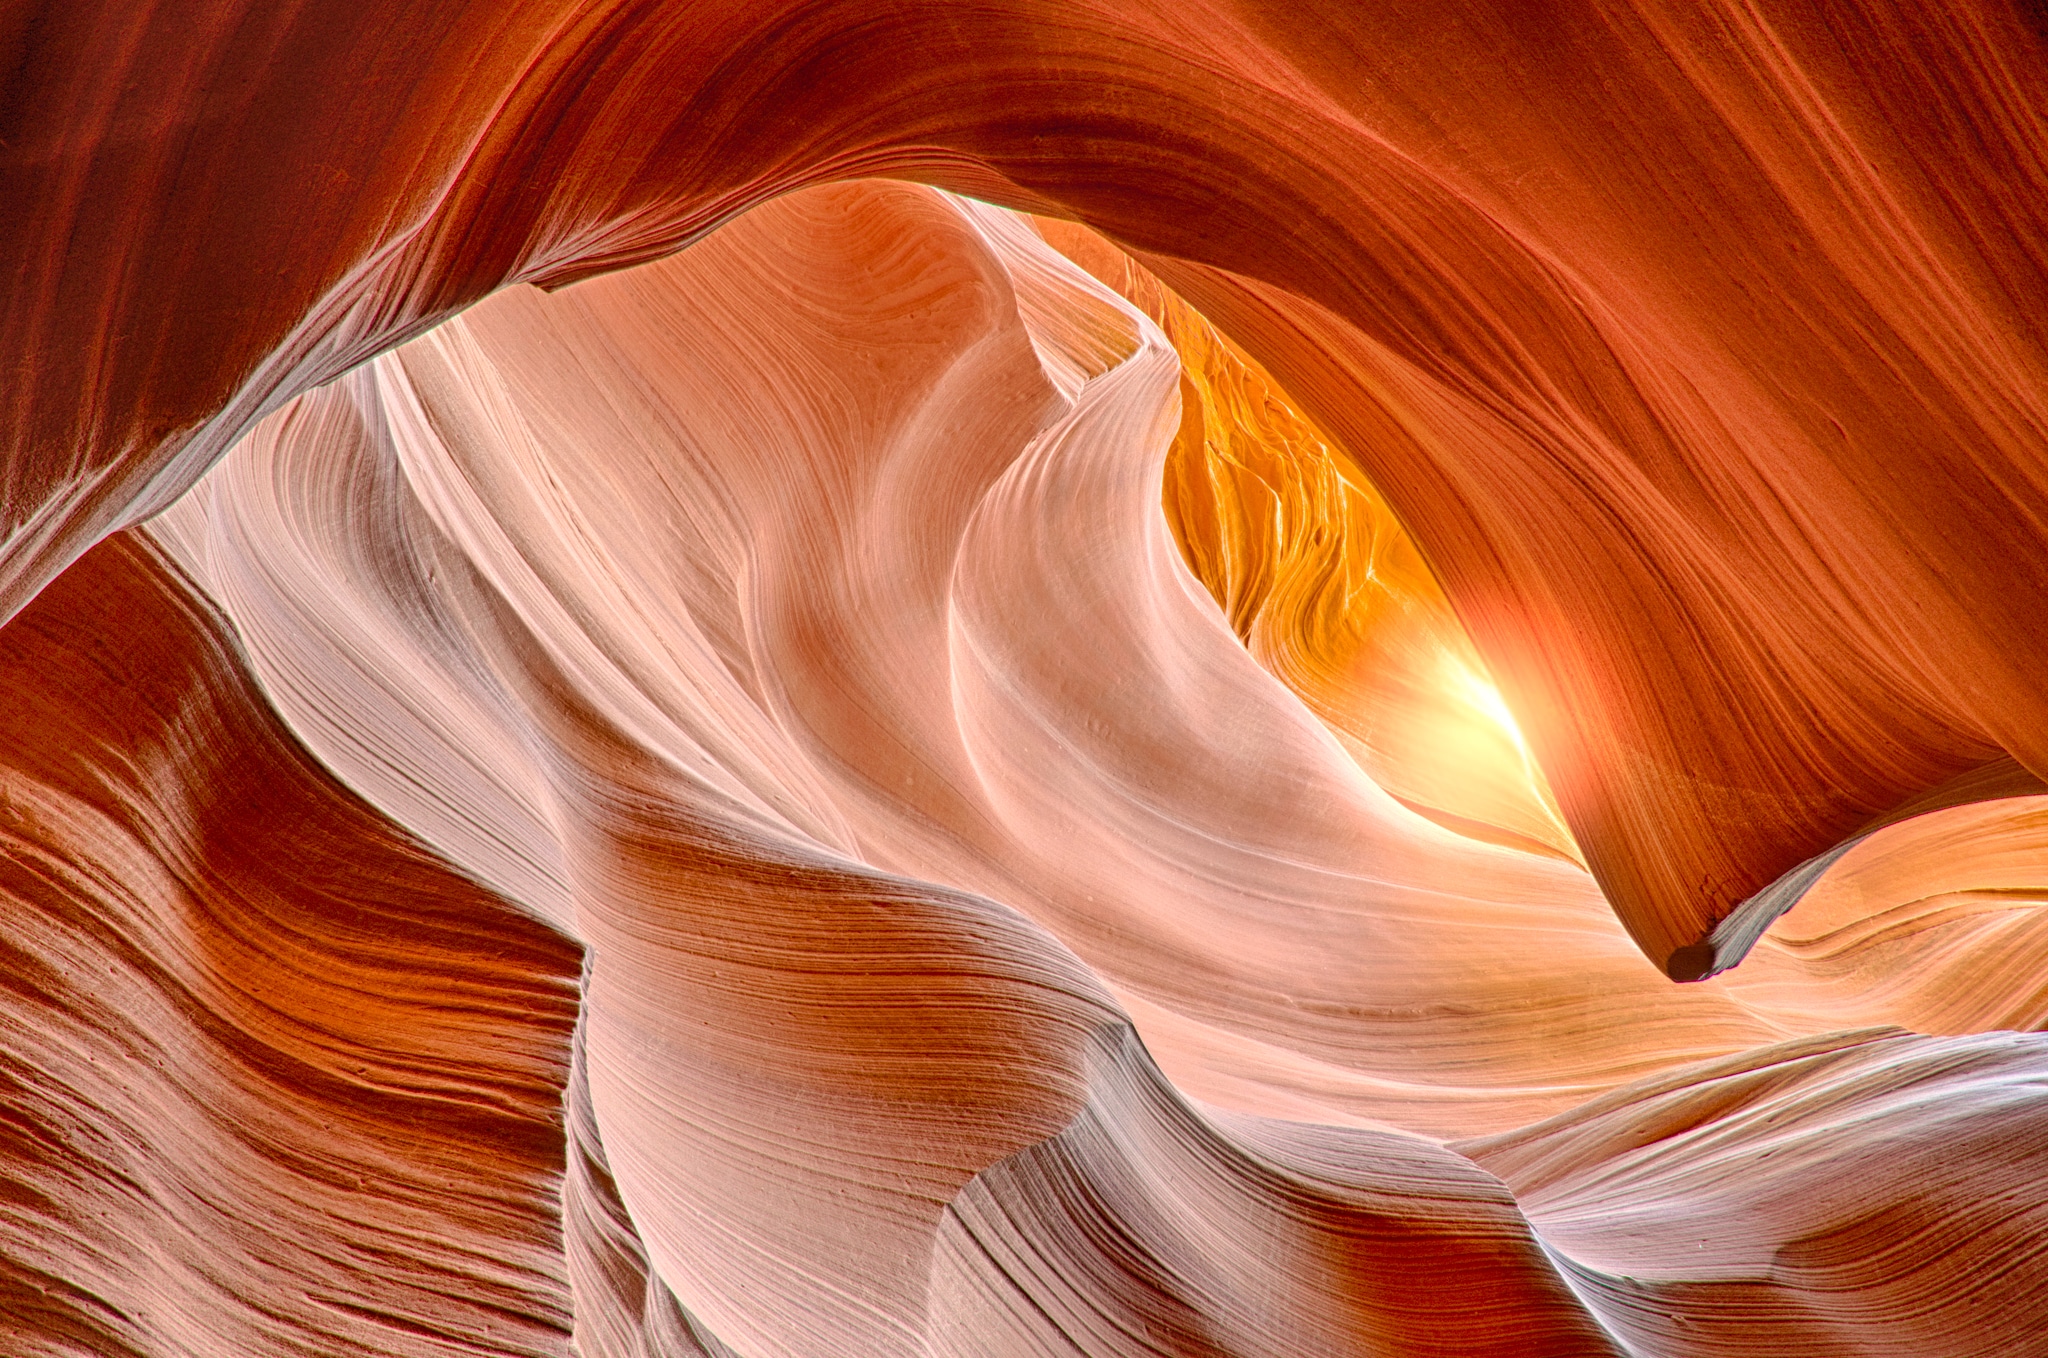 View through Lower Antelope Canyon, a slot canyon just east of Page, Arizona.